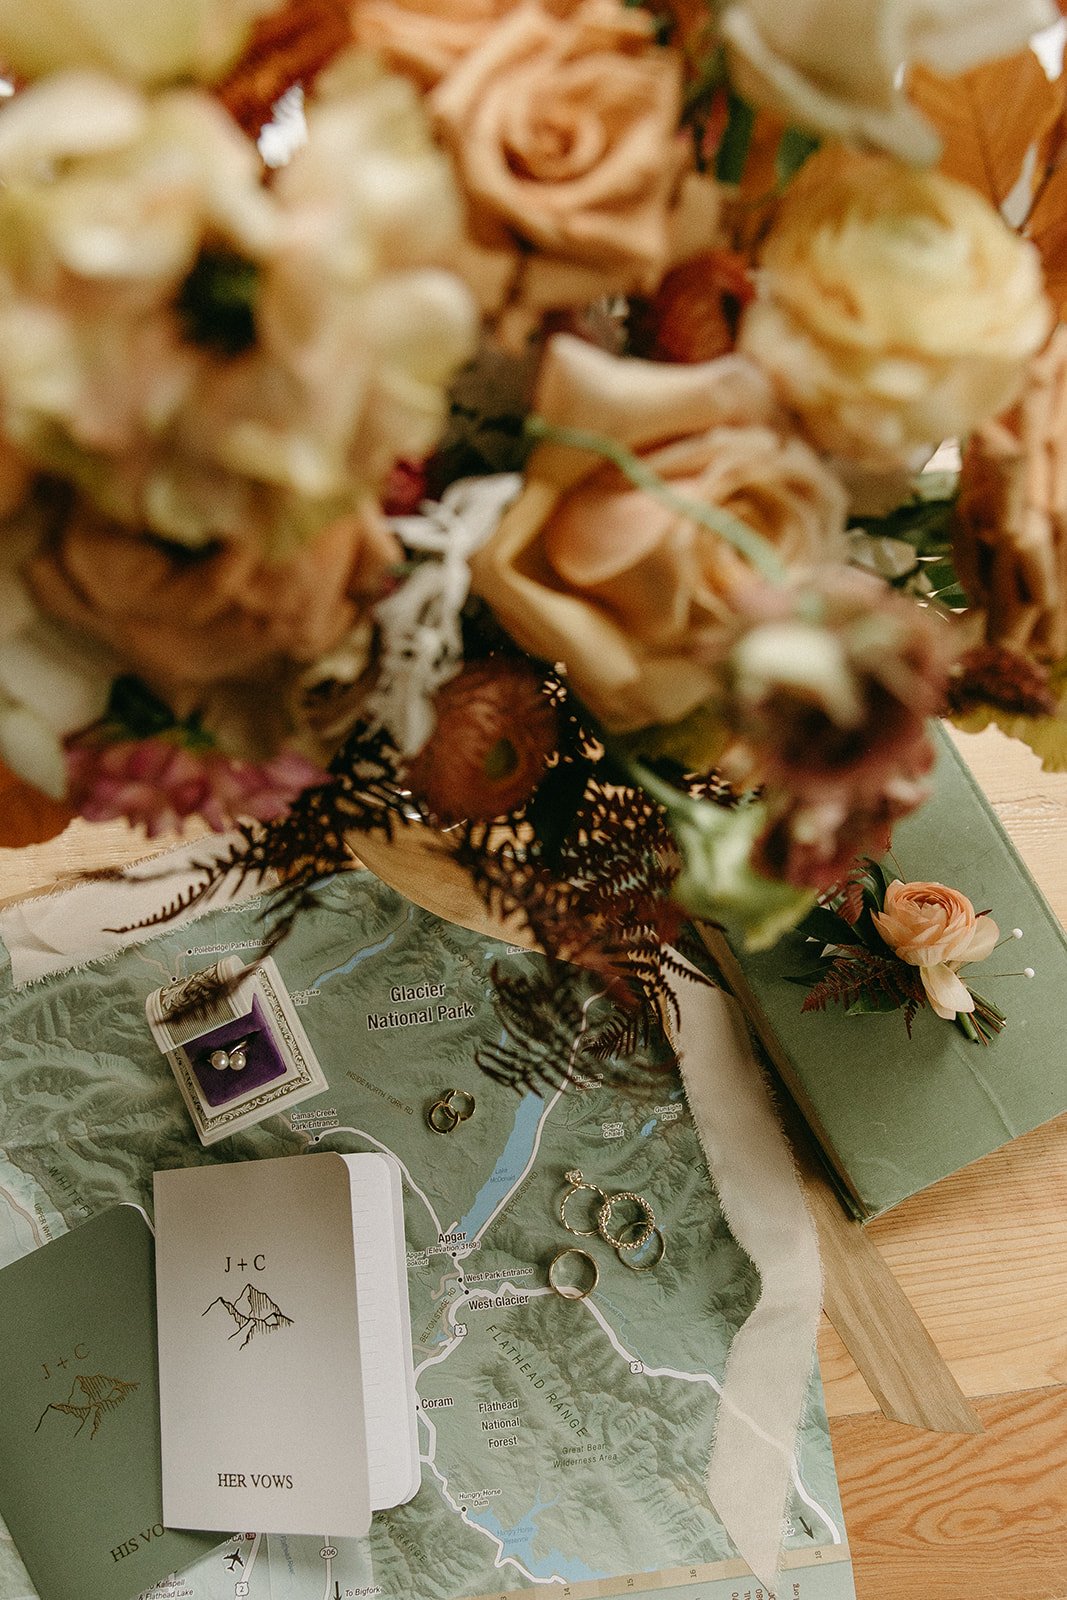 Bridal bouquet, vow books, and wedding rings